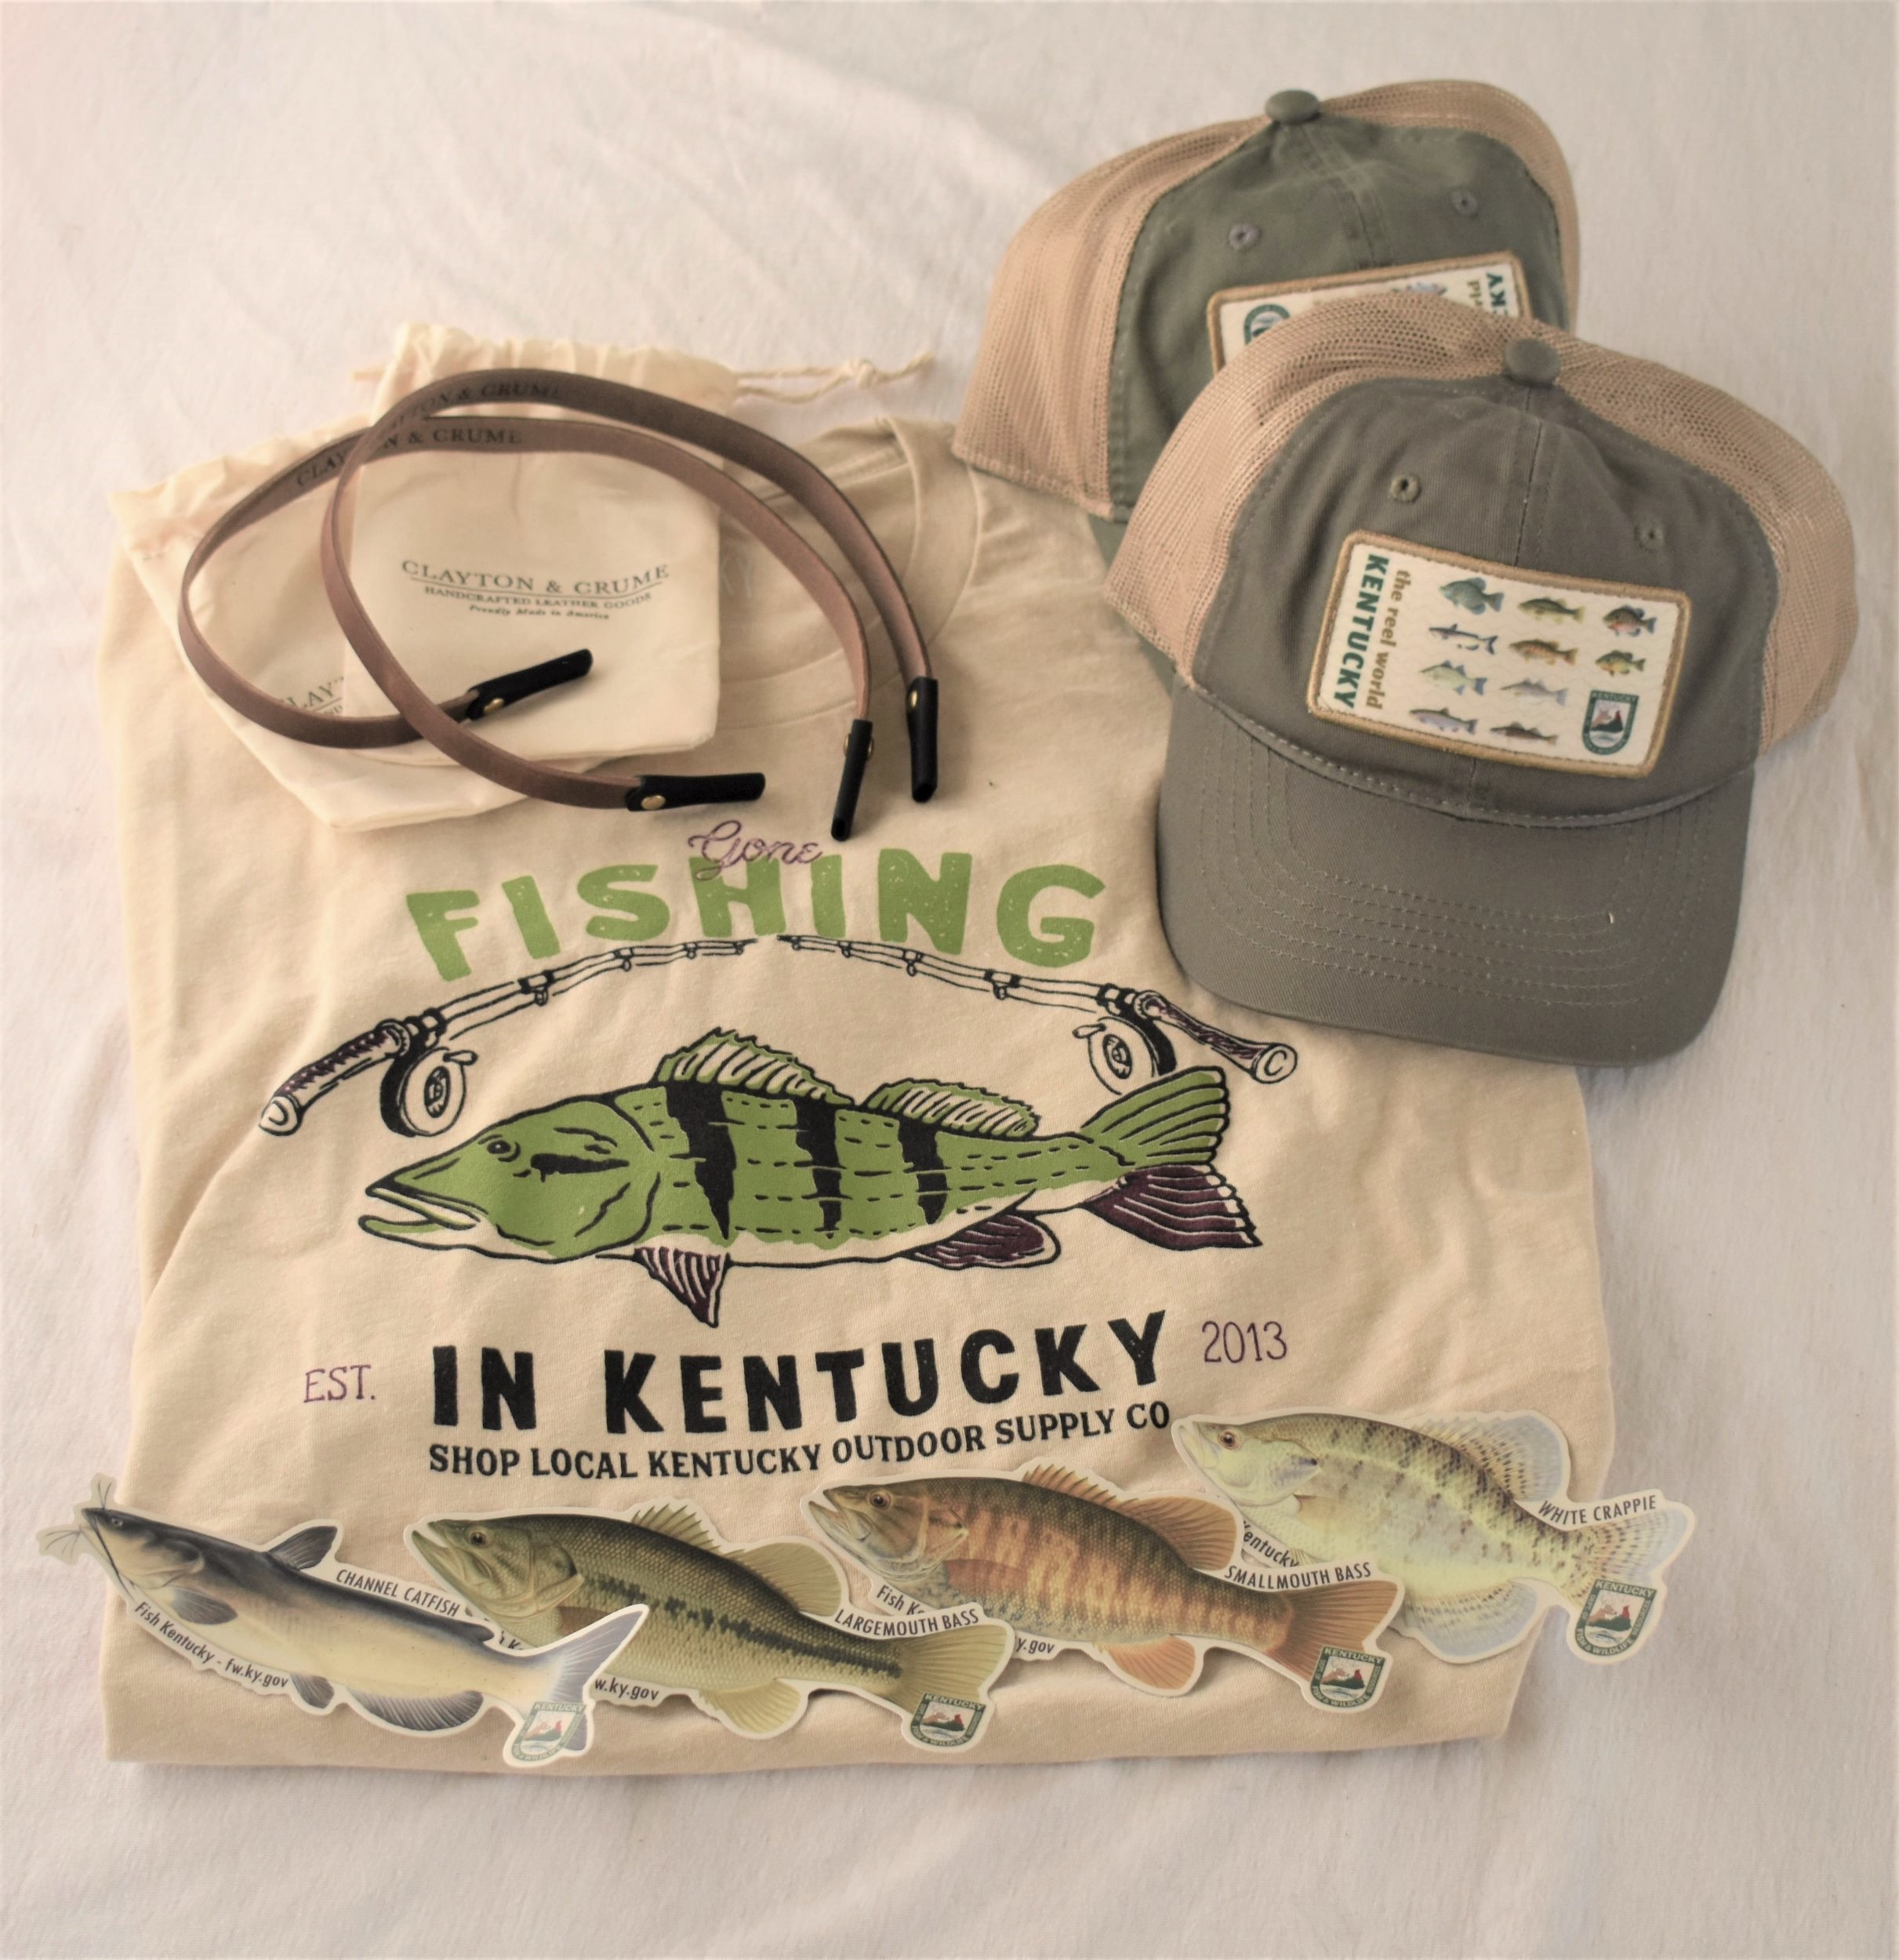 Gone Fishing - Shop Local Kentucky, Clayton & Crume, and KDFWR